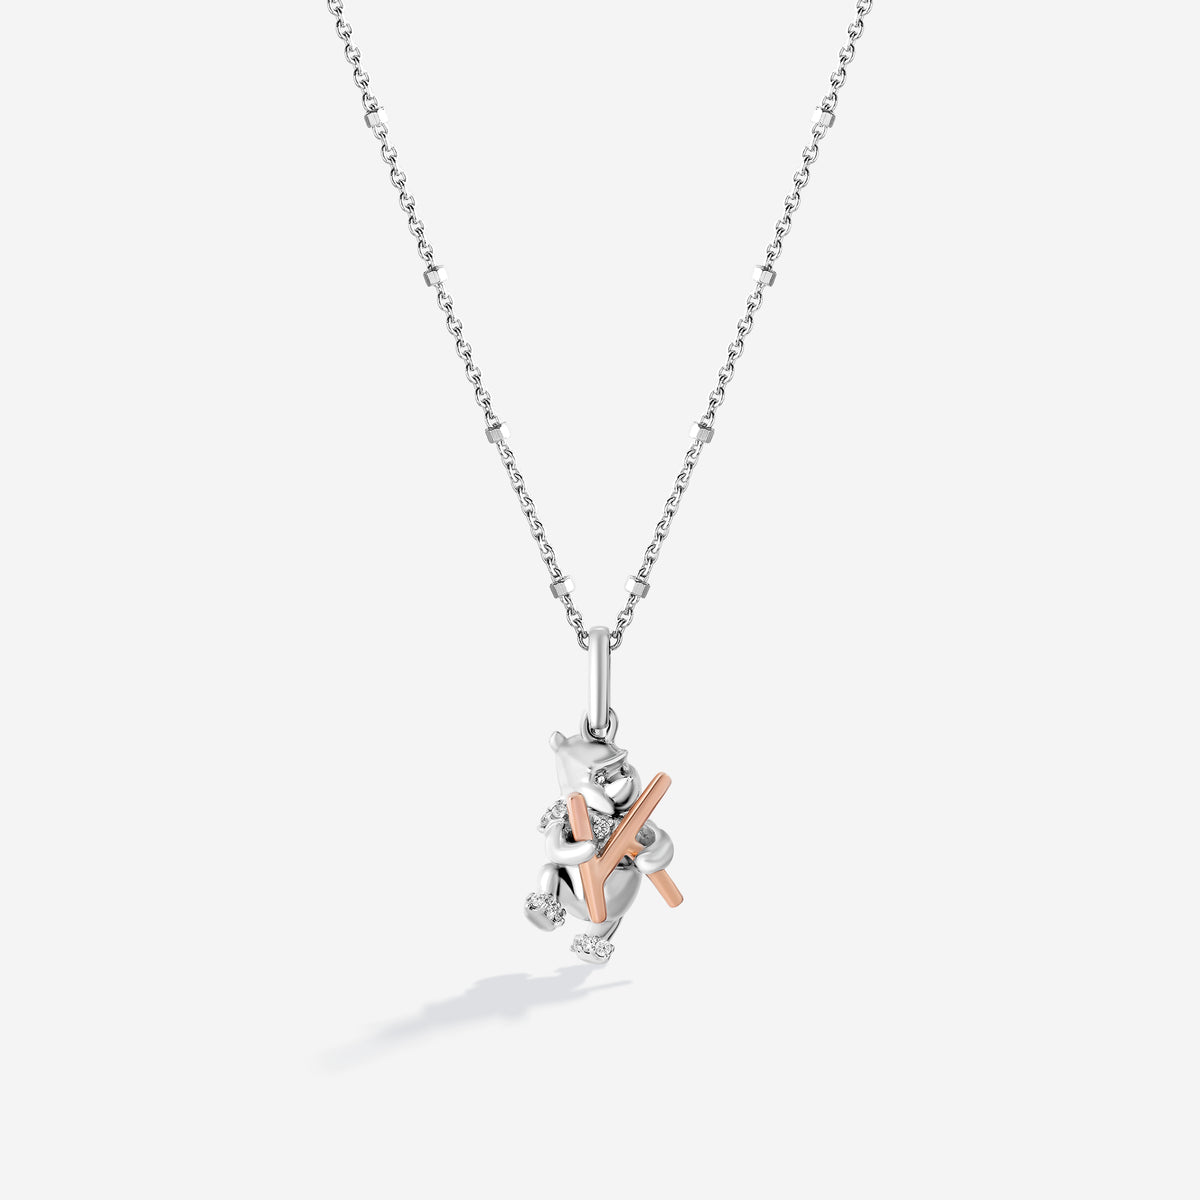 NEW IN: The whole alphabet. Personalize your chain stack with